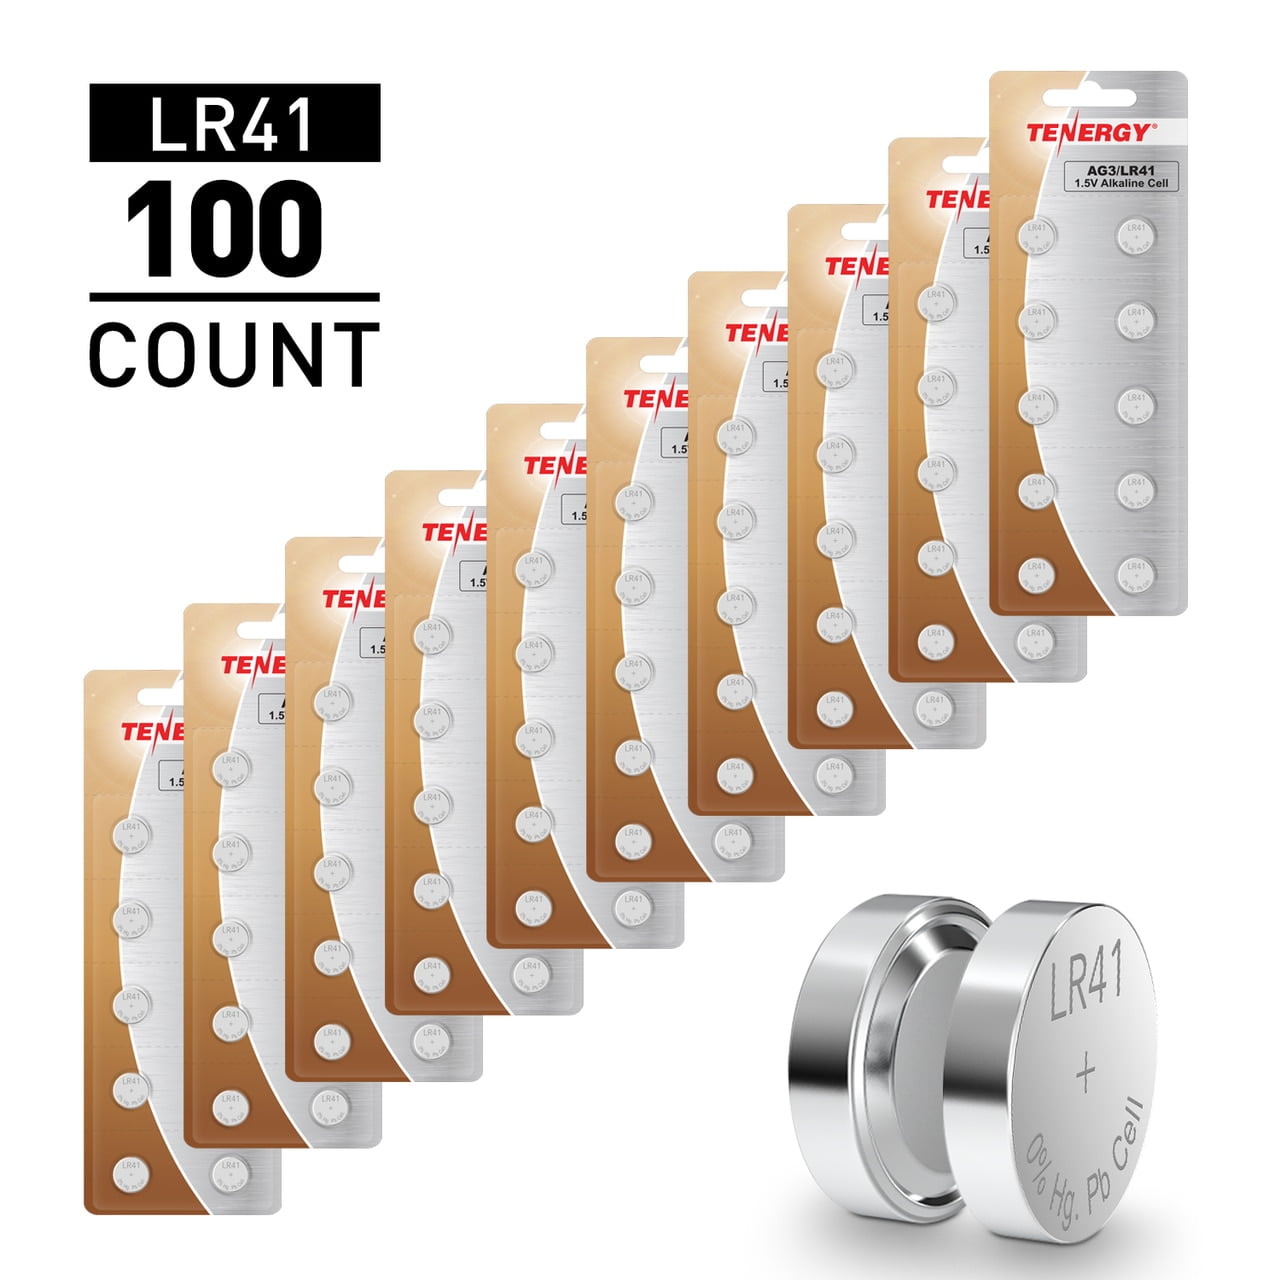 AG3 / LR41 Alkaline Button Watch Battery 1.5V - 10 Pack - FREE SHIPPING